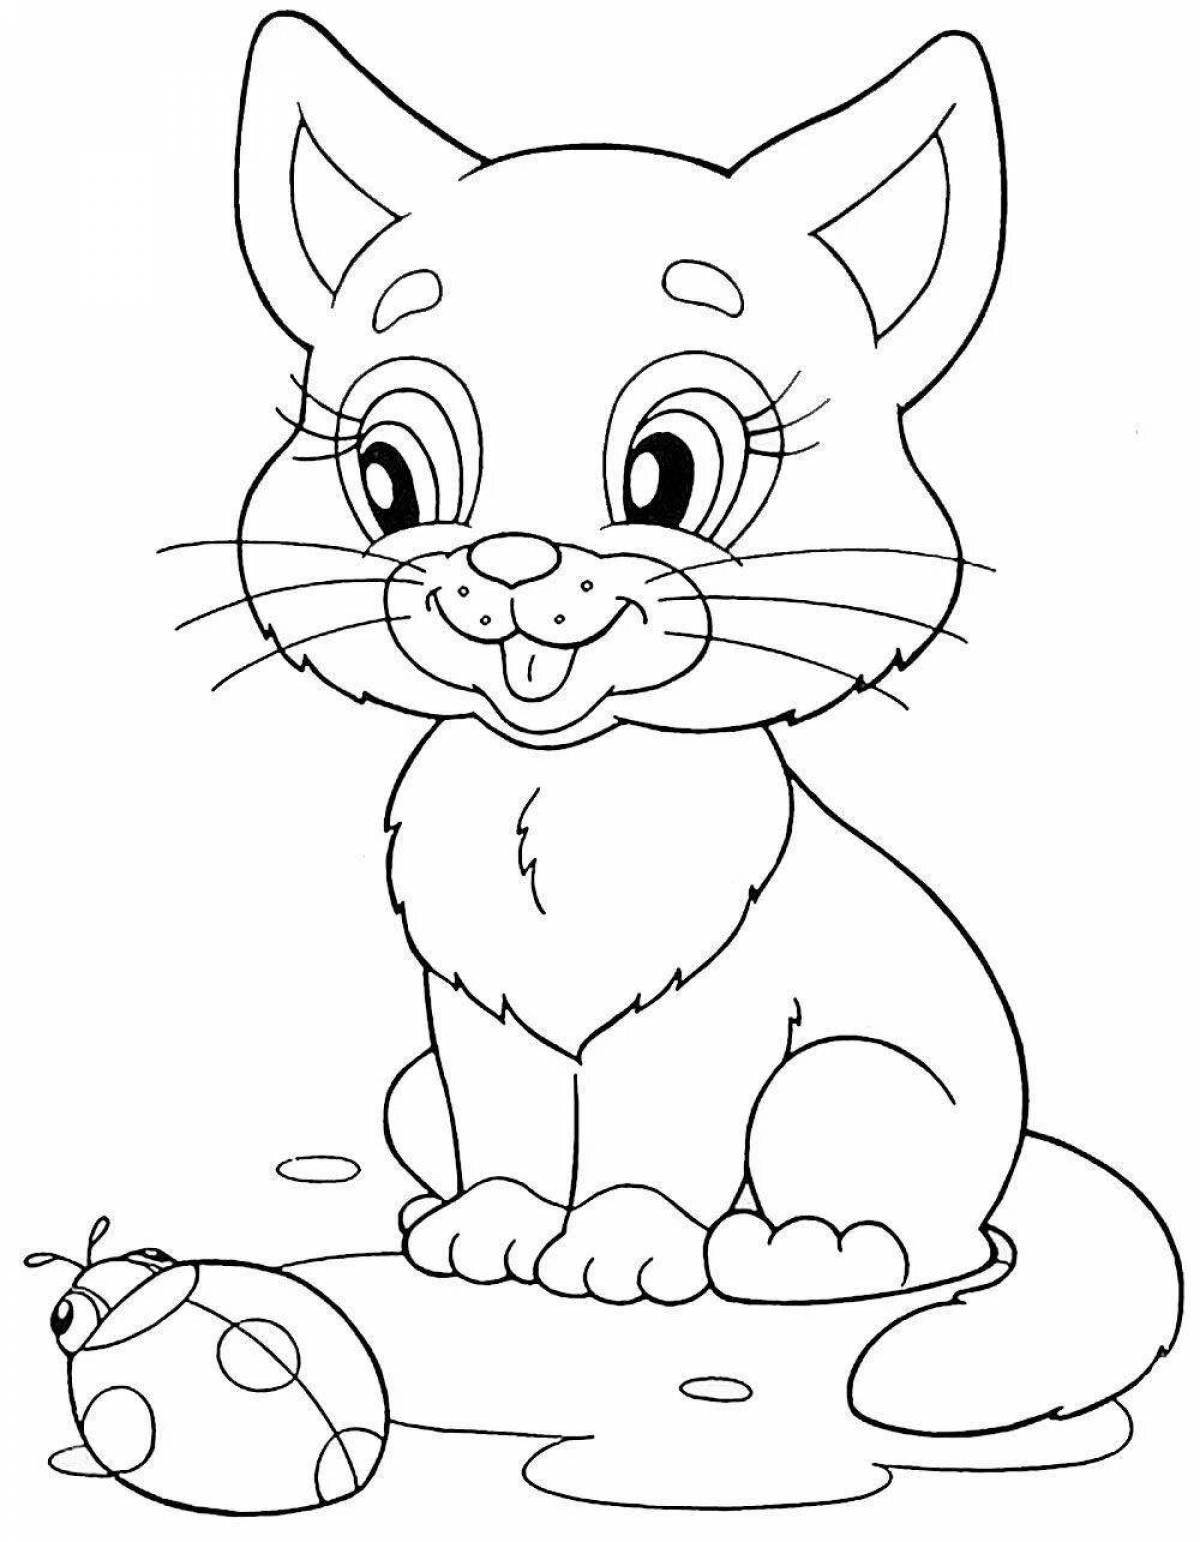 Magic coloring book for children 5-6 years old for girls animals